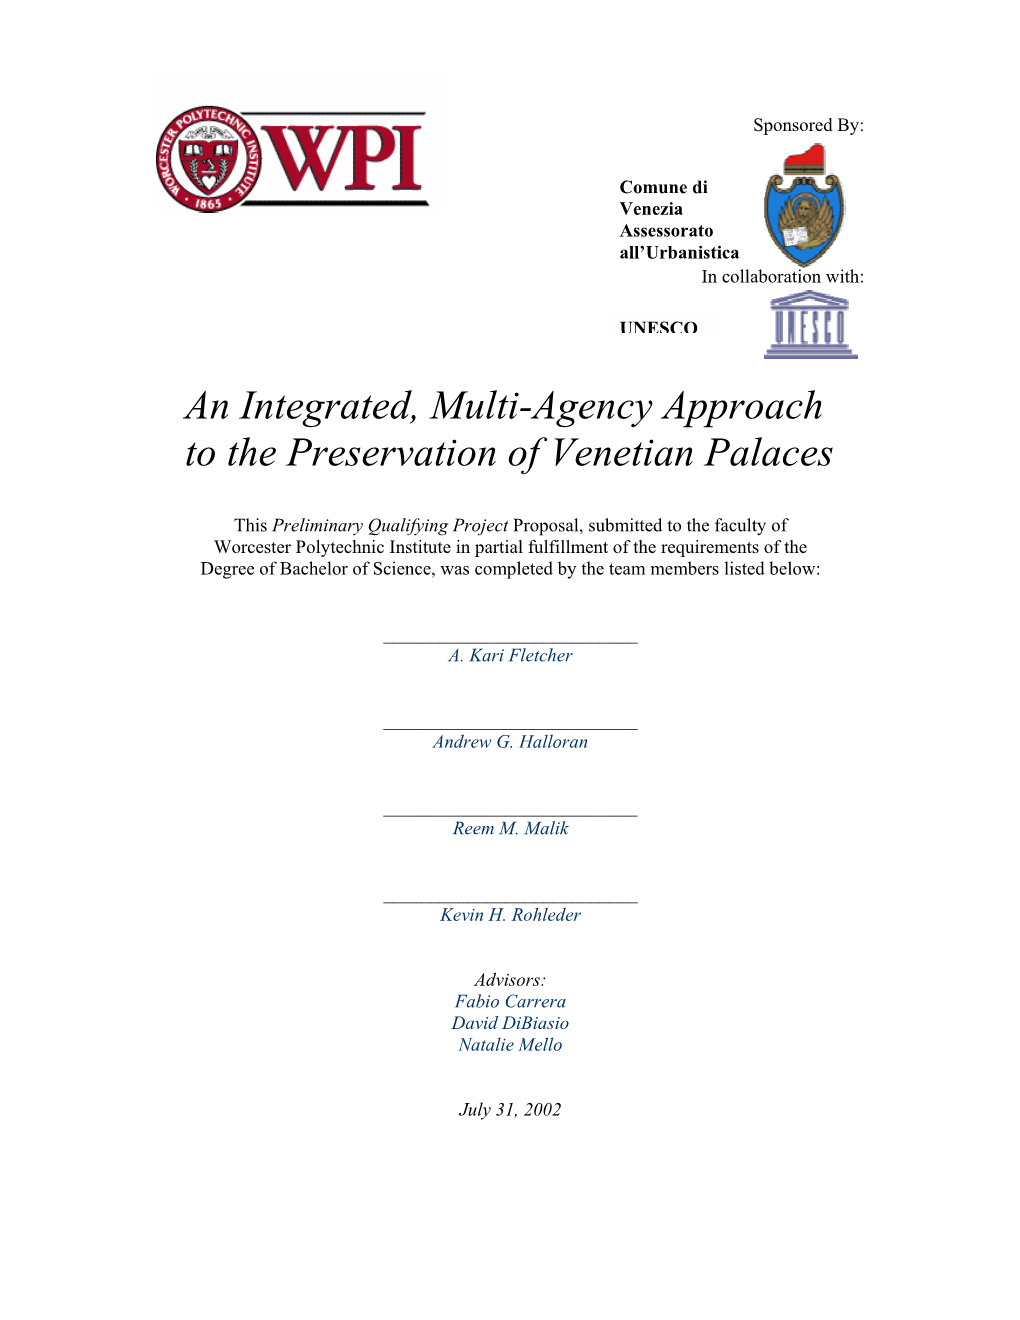 An Integrated, Multi-Agency Approach to the Preservation of Venetian Palaces